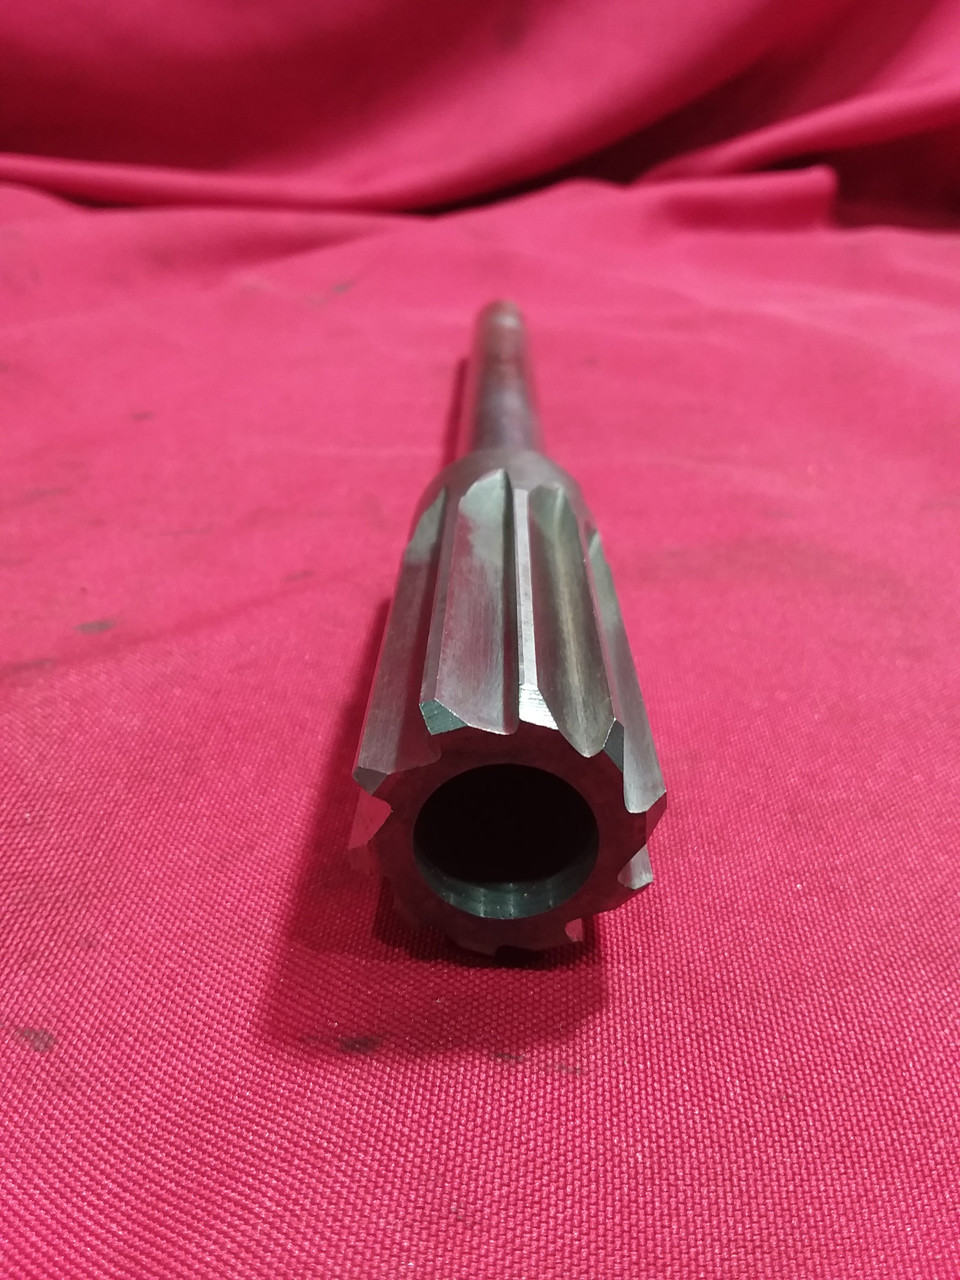 Cleveland 41244 1-1/16" Reamer Cutting Tool